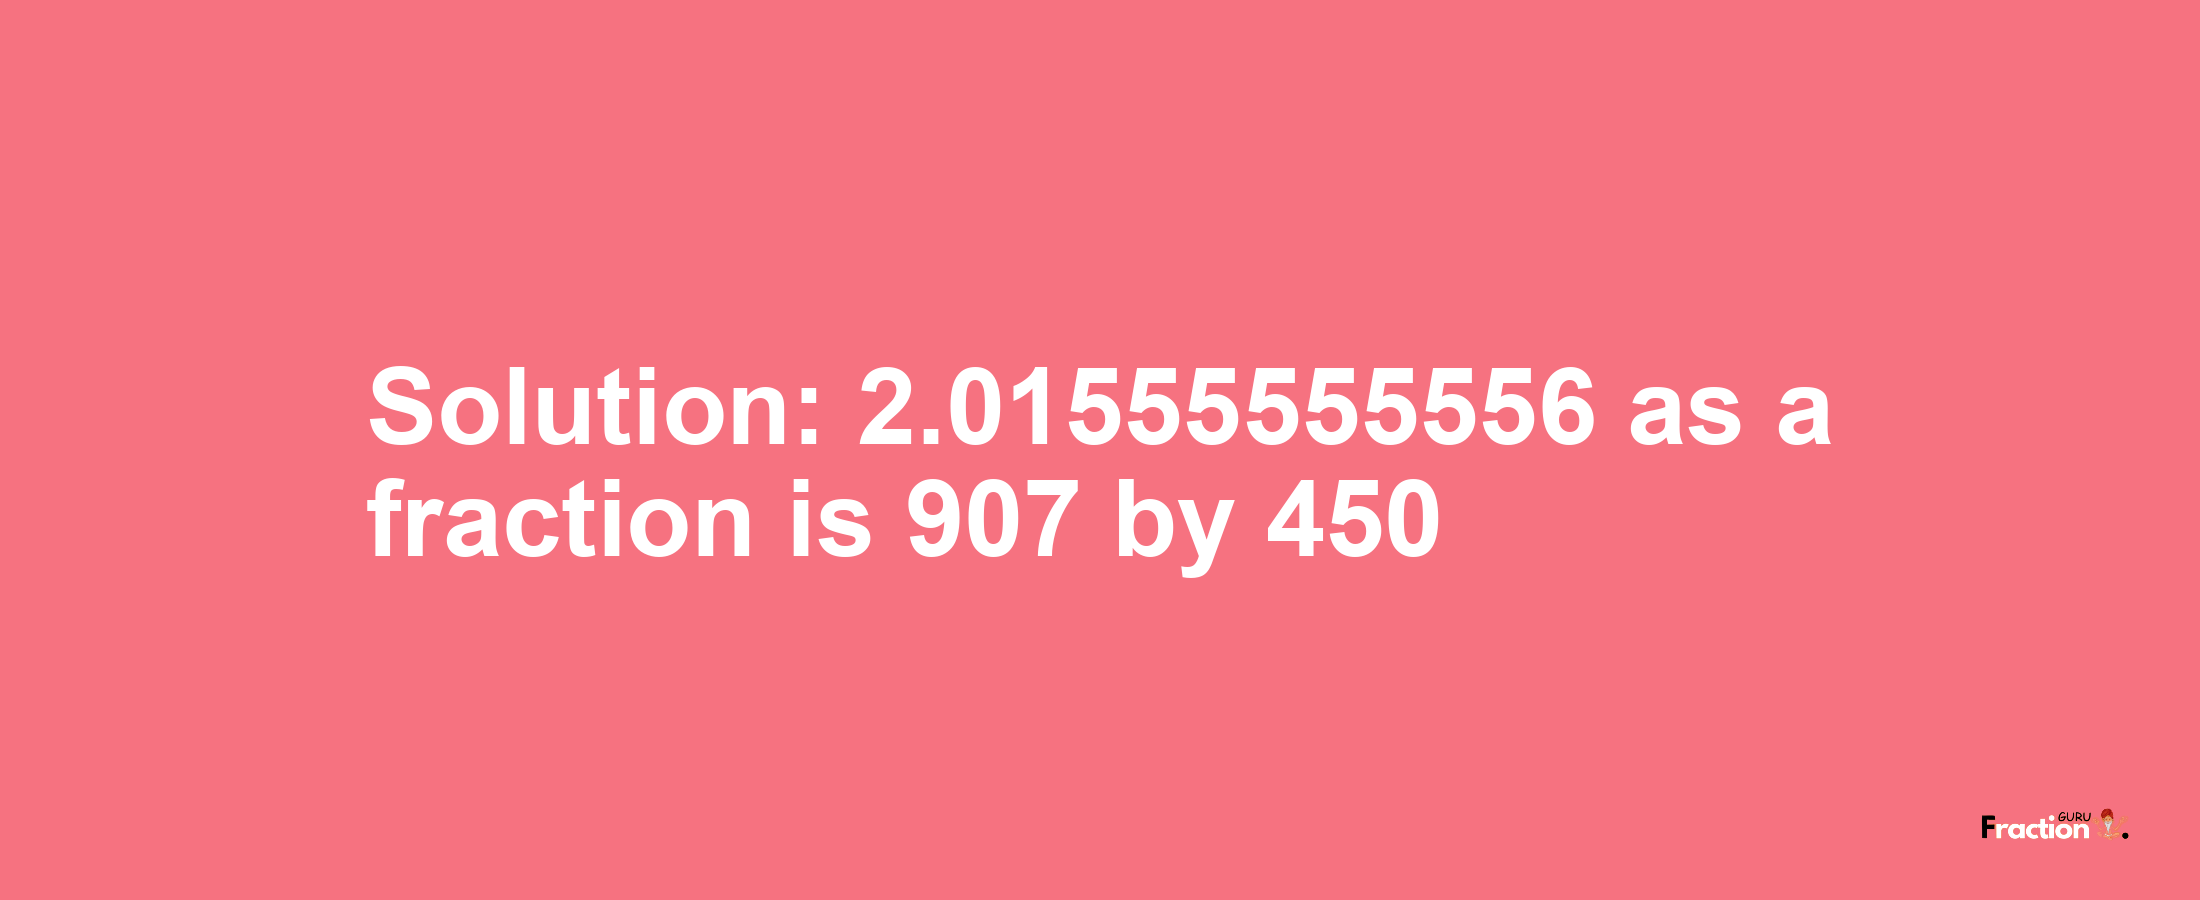 Solution:2.01555555556 as a fraction is 907/450